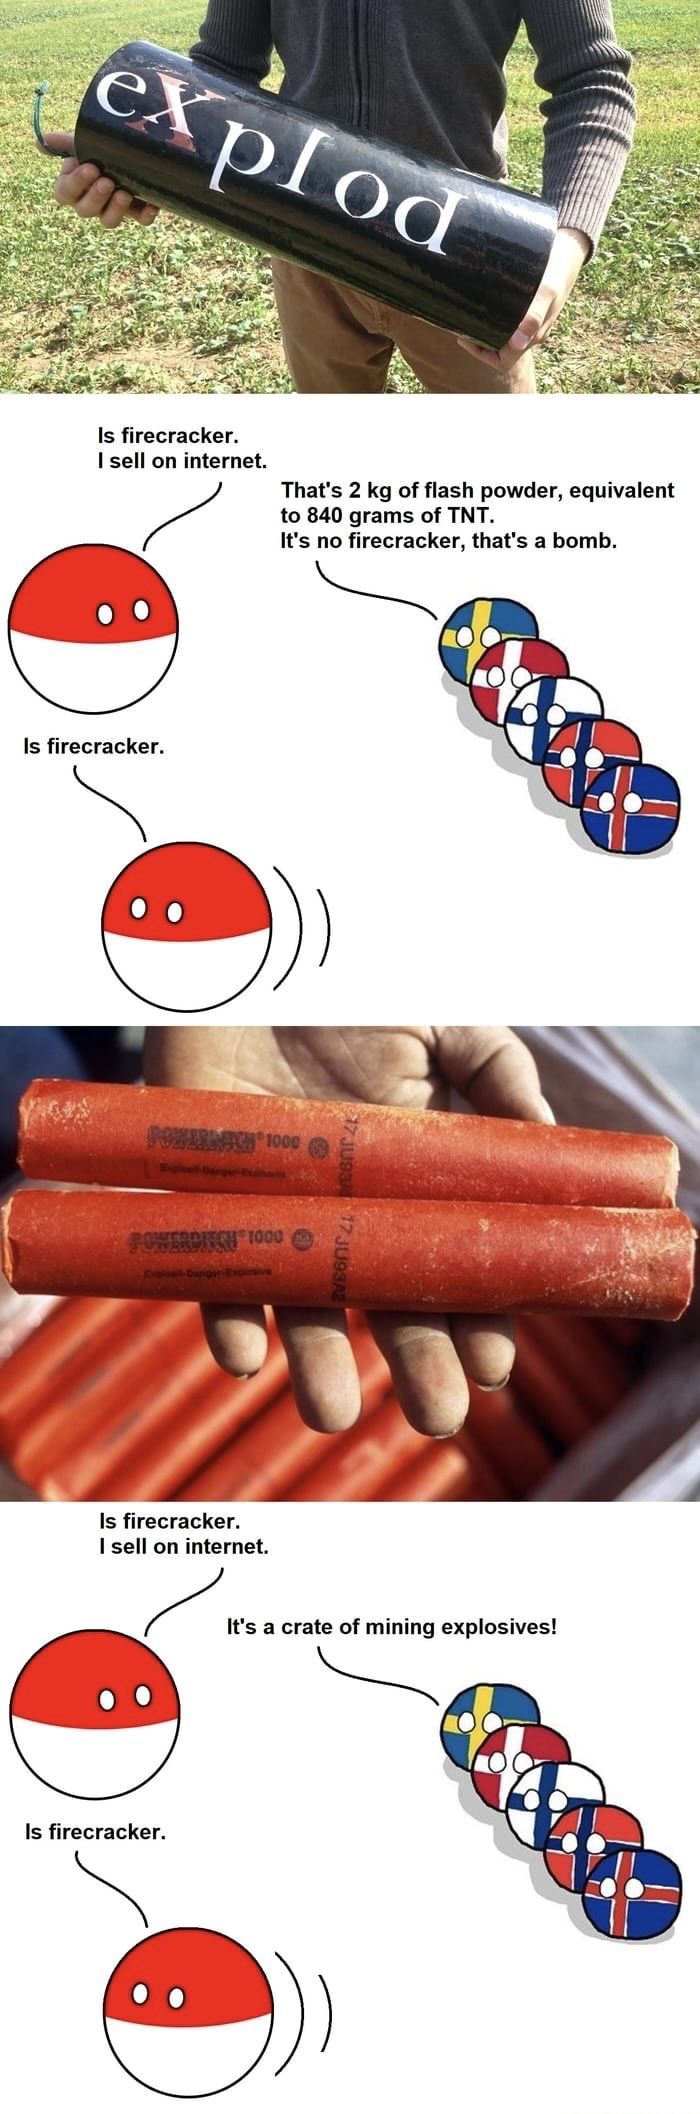 They are only firecrackers